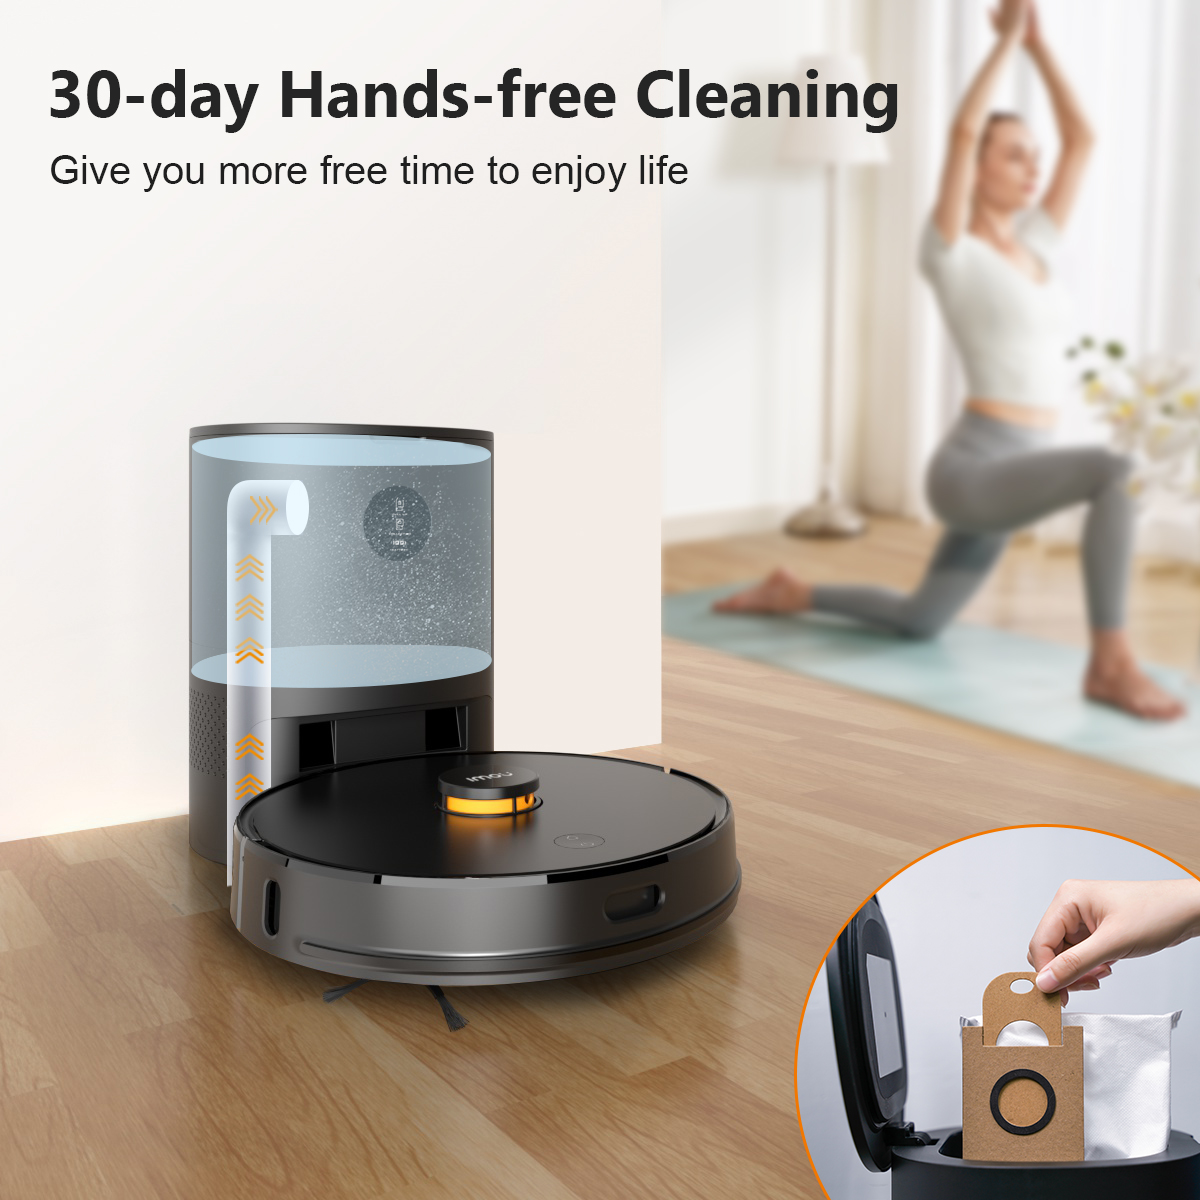 Home Electric Robotic Vacuum Cleaner Mop 2700Pa Suction Hard Floor Sweeping <a href='/self-cleaning-robot/'>Self Cleaning Robot</a>s